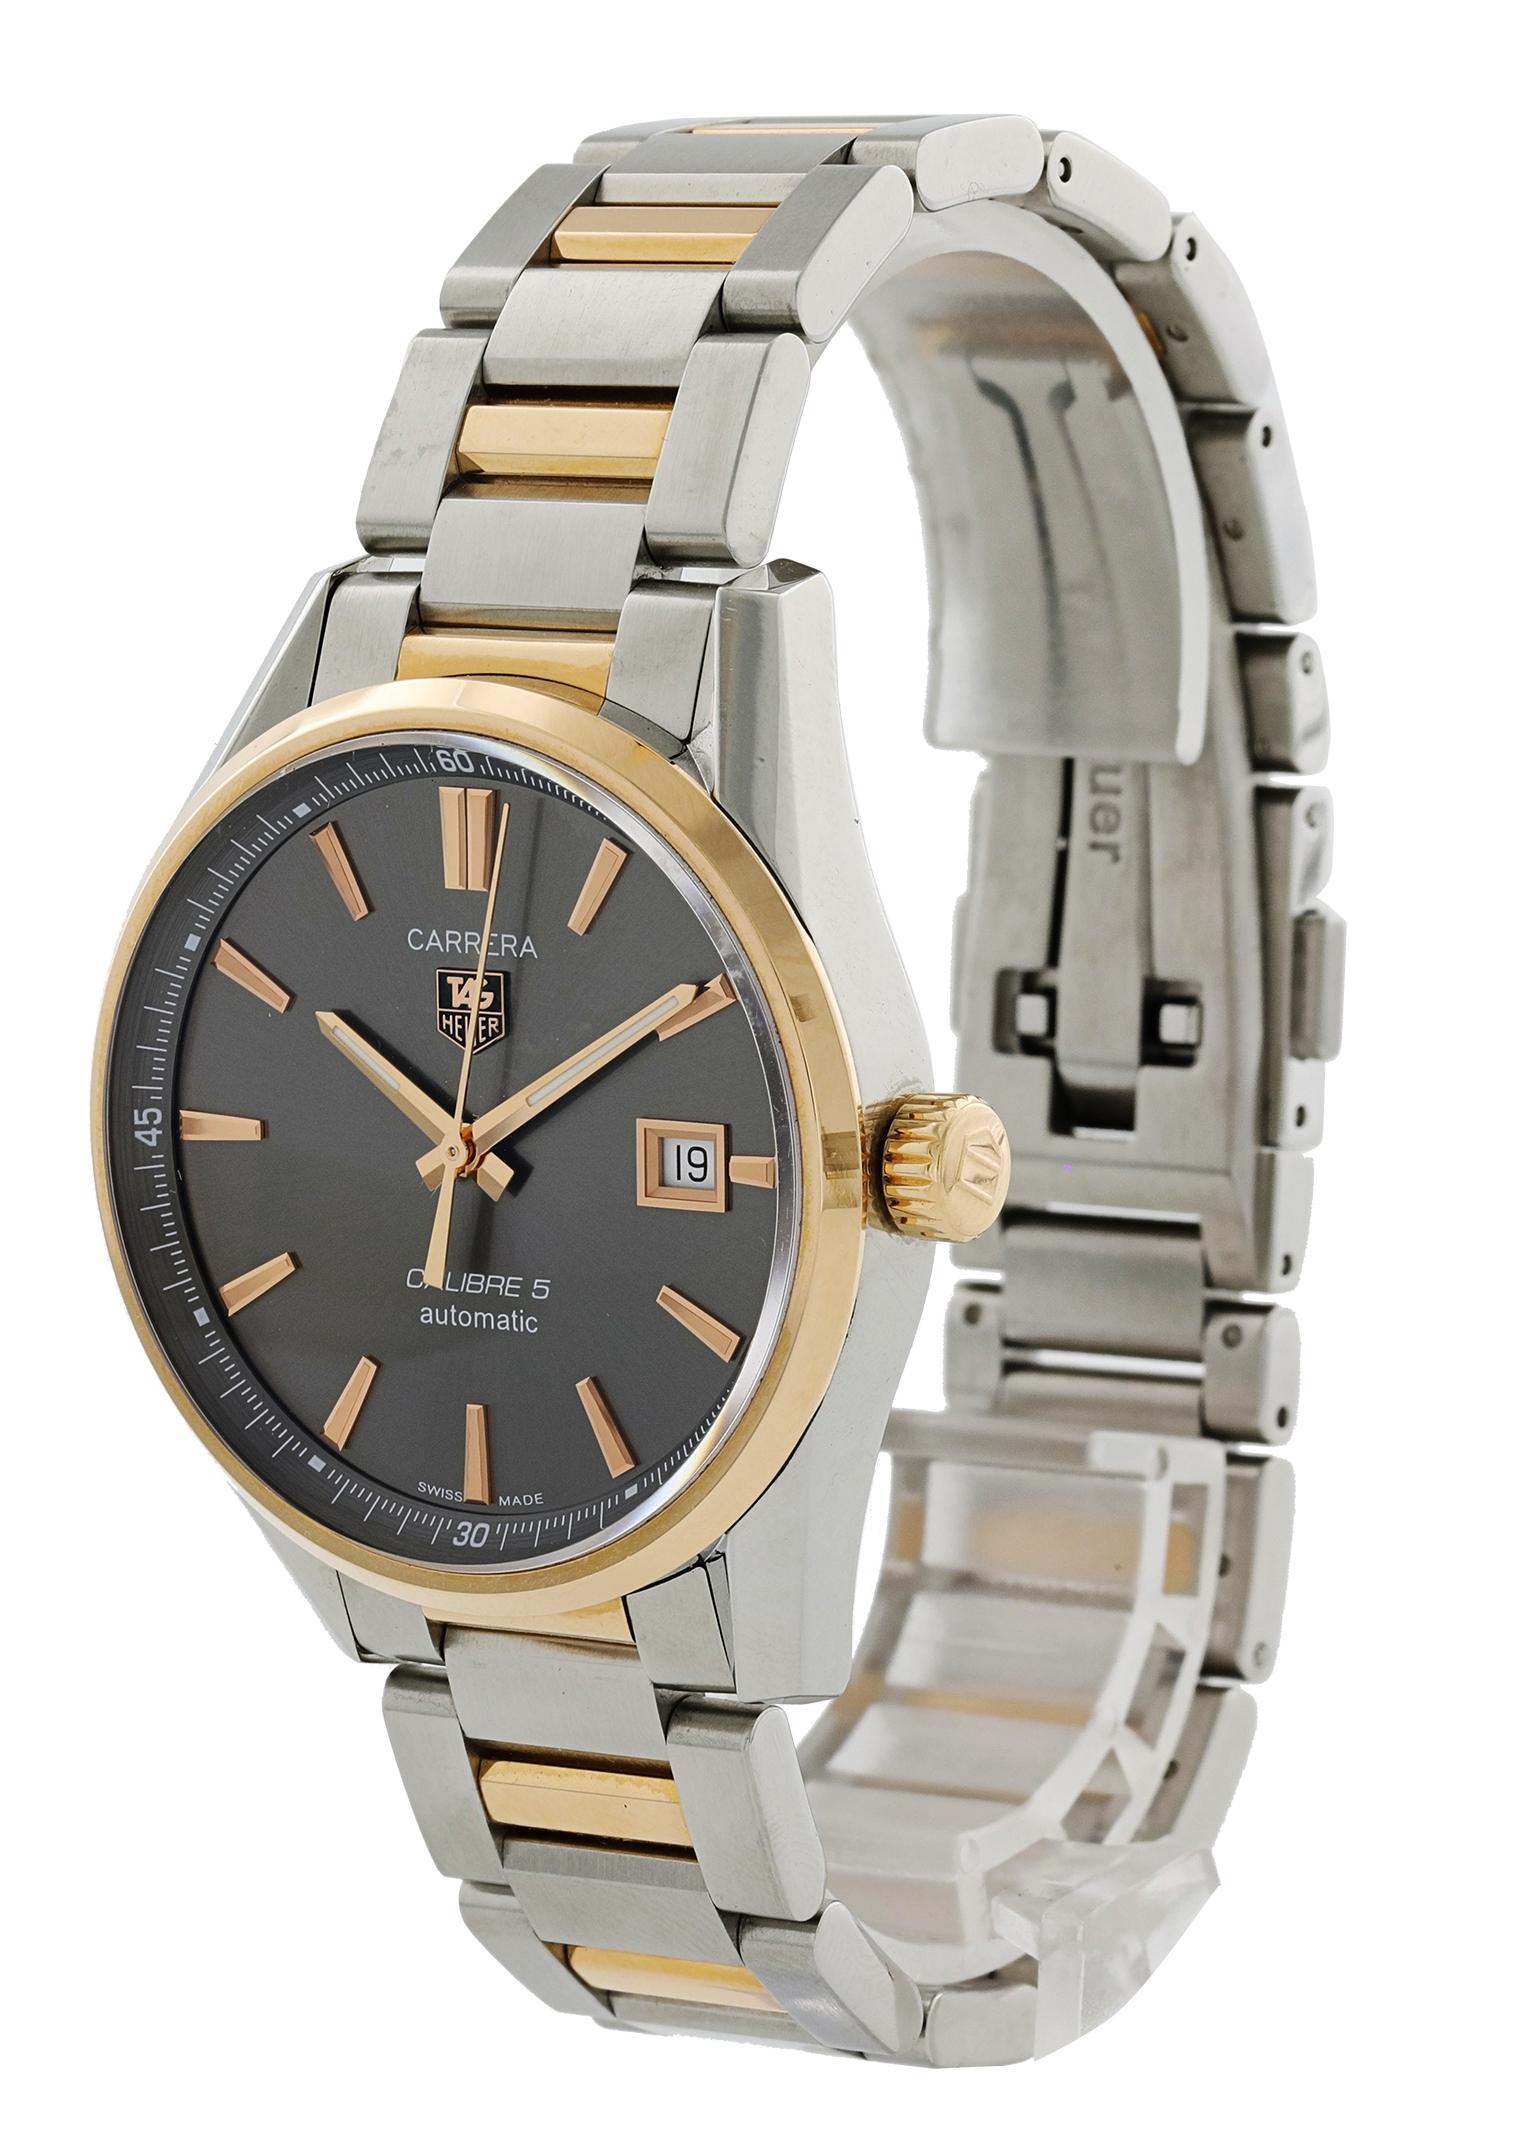 Tag Heuer Carrera Calibre 5 WAR215E.BD0784 Men Watch. 
39mm Stainless Steel case. 
Yellow Gold bezel. 
Gray dial with Luminous gold hands and index hour markers. 
Minute markers on the outer dial. 
Date display at the 3 o'clock position. 
Two Tone